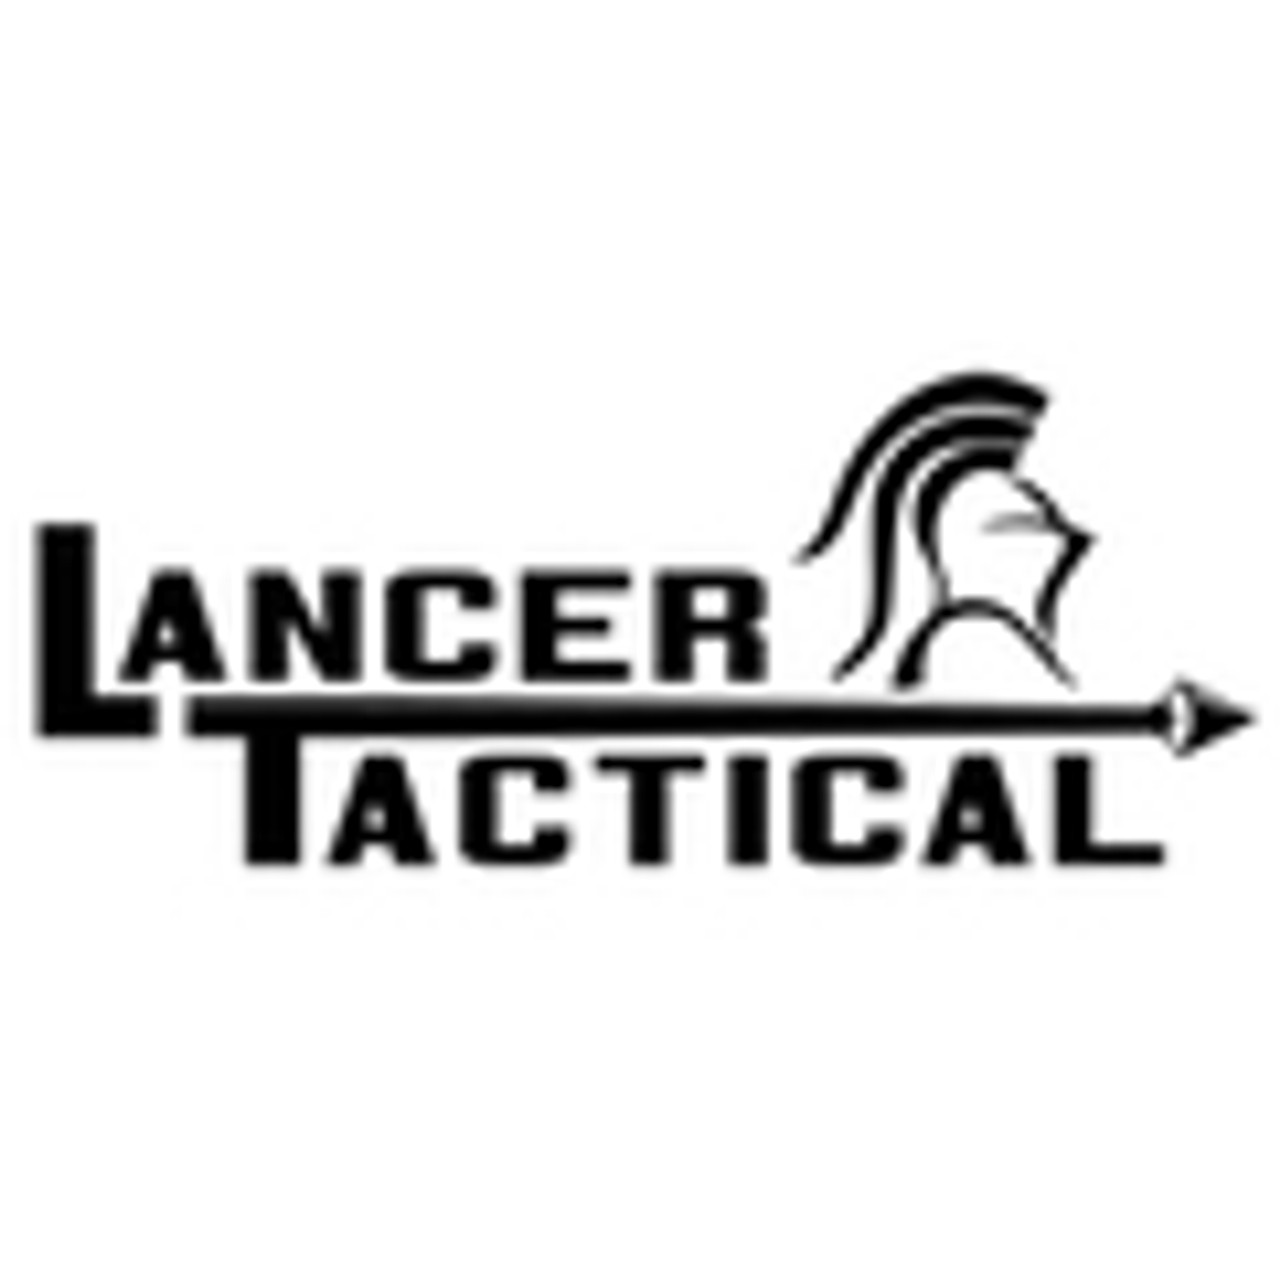 Lancer Tactical AEGs